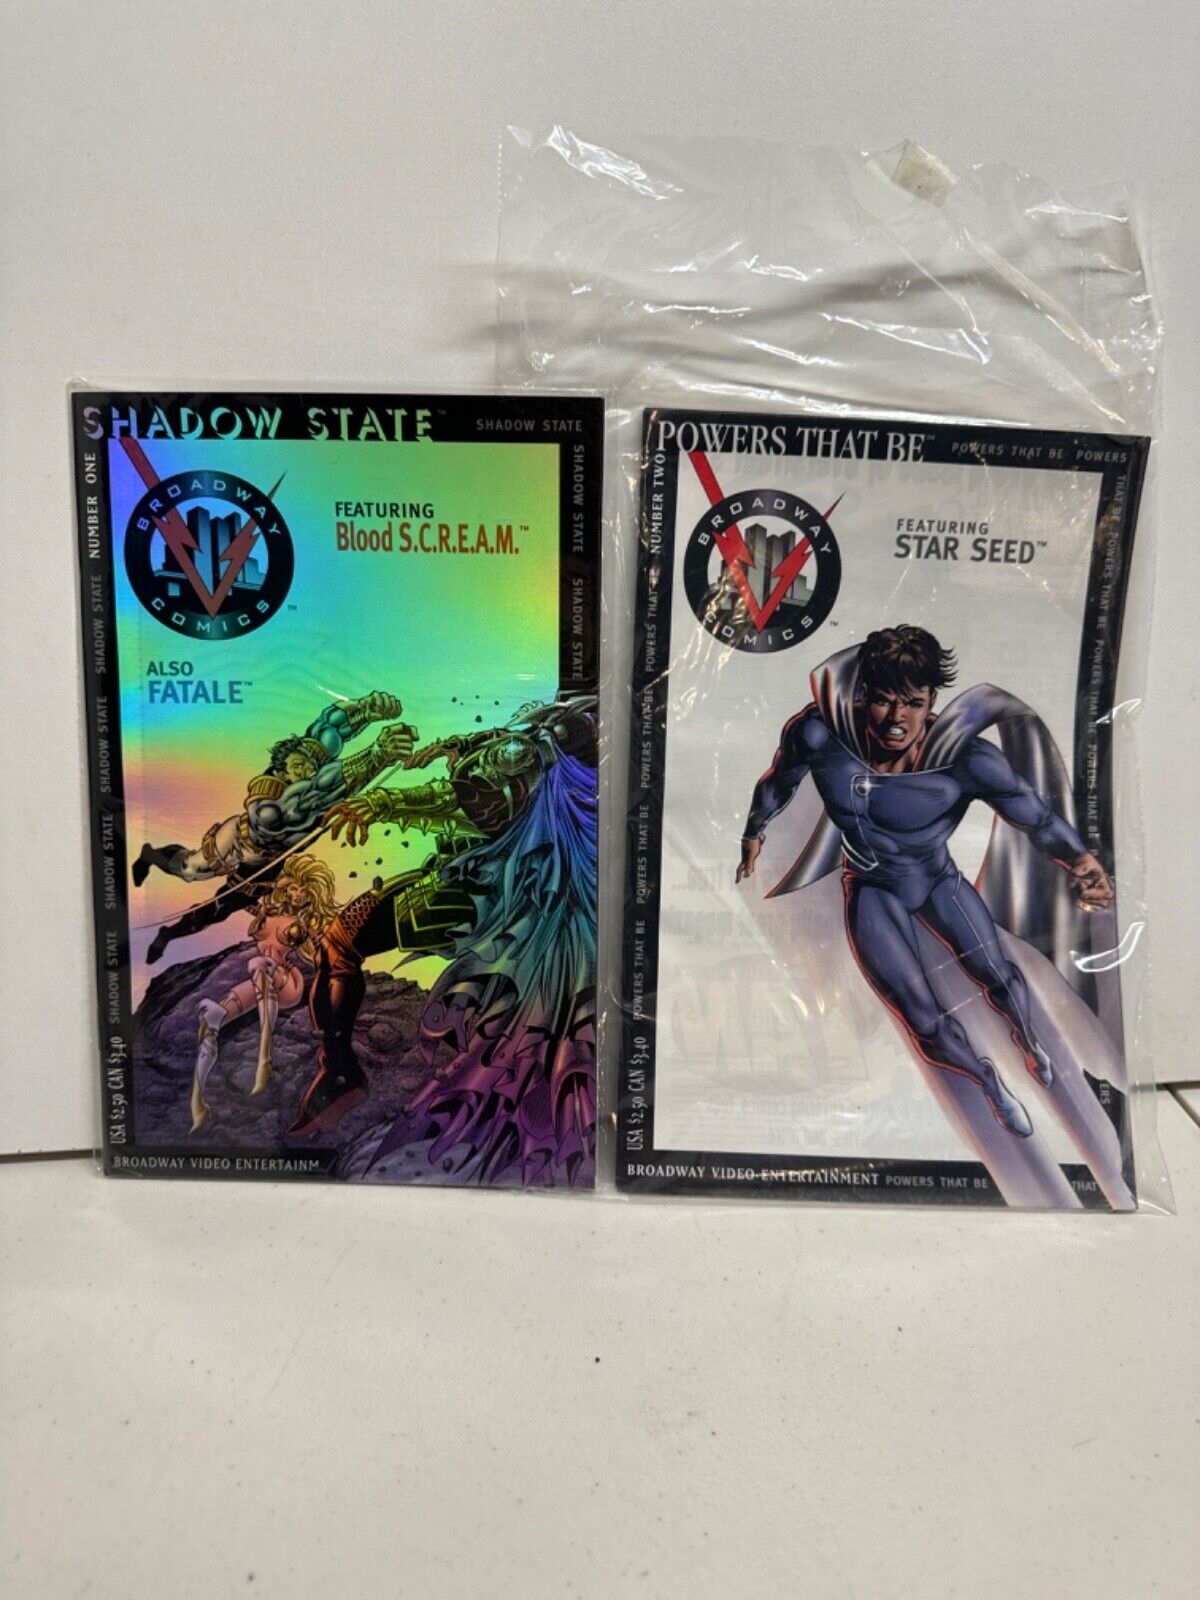 Shadow State featuring Blood S.C.R.E.A.M. no. 1 and Star Seed No. 2